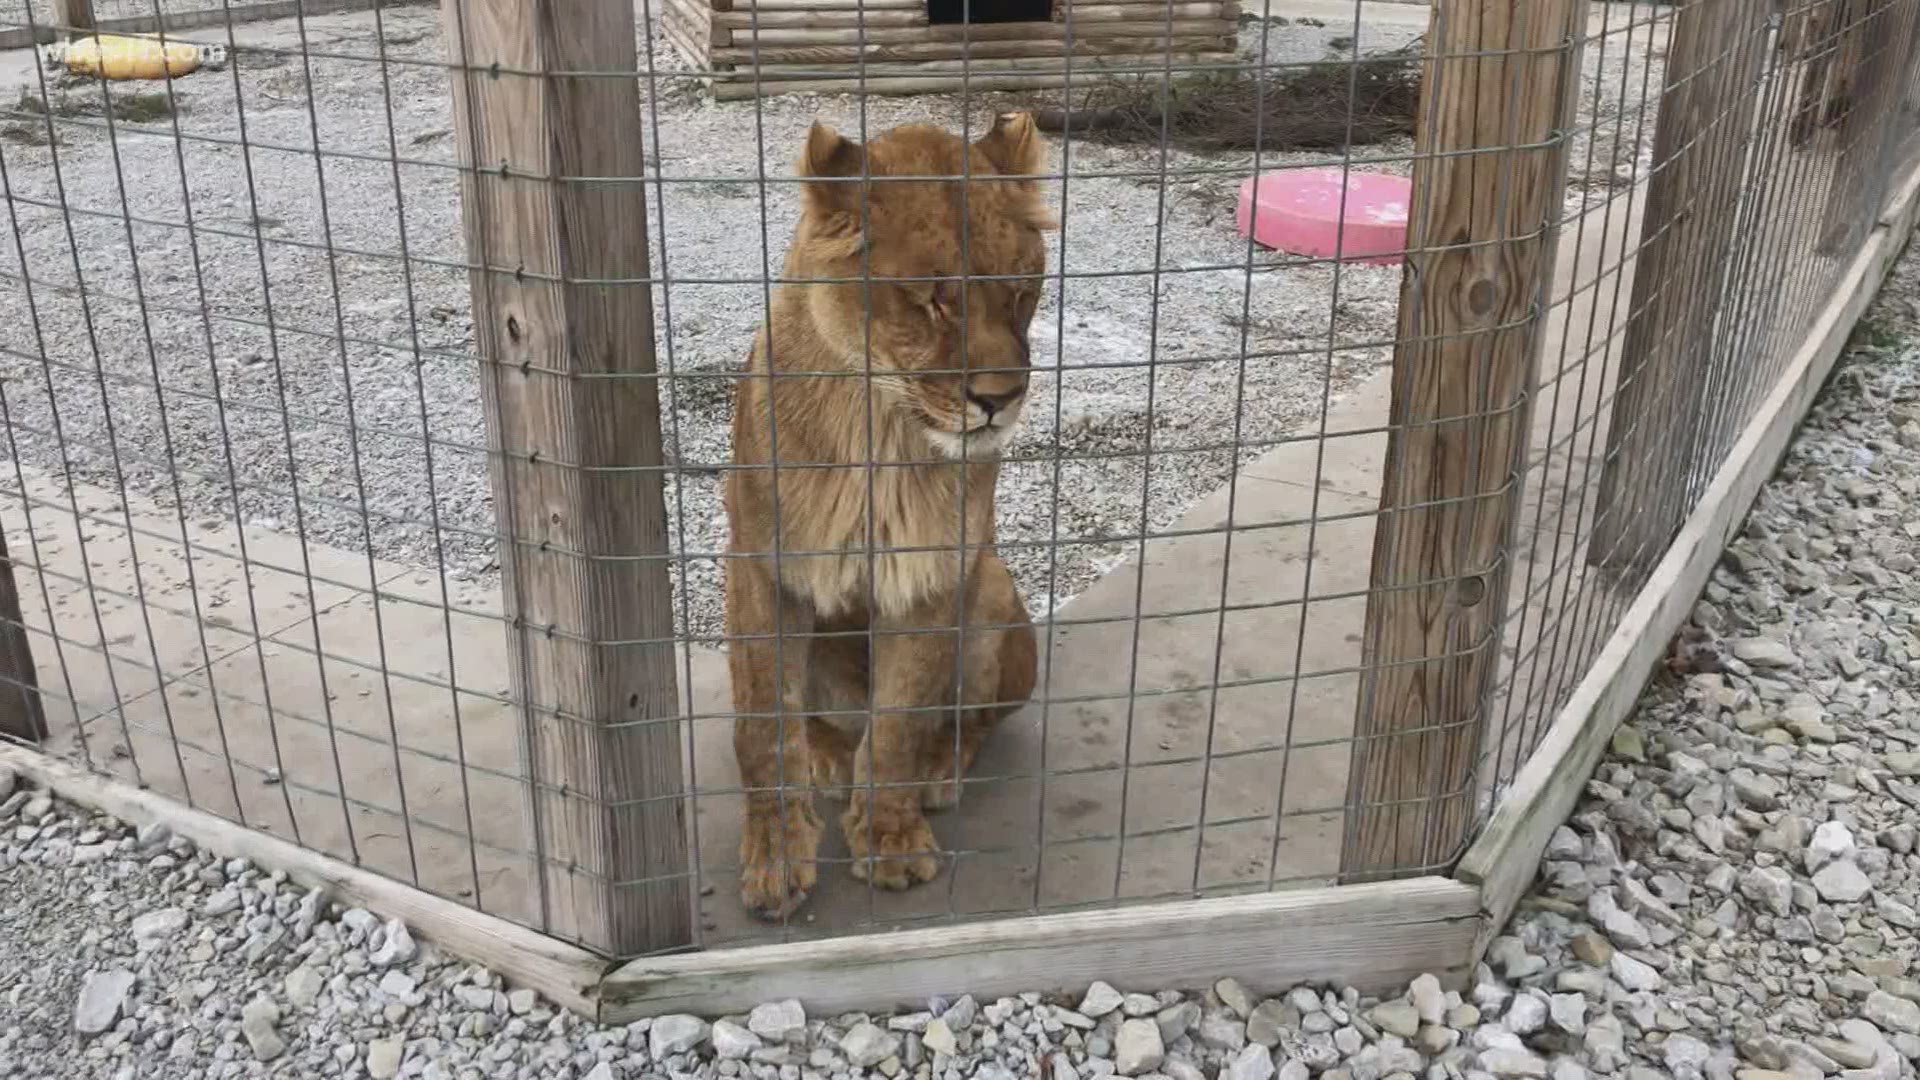 Self-proclaimed animal sanctuary Wildlife in Need is facing new legal trouble after two big cats died on the property last week.